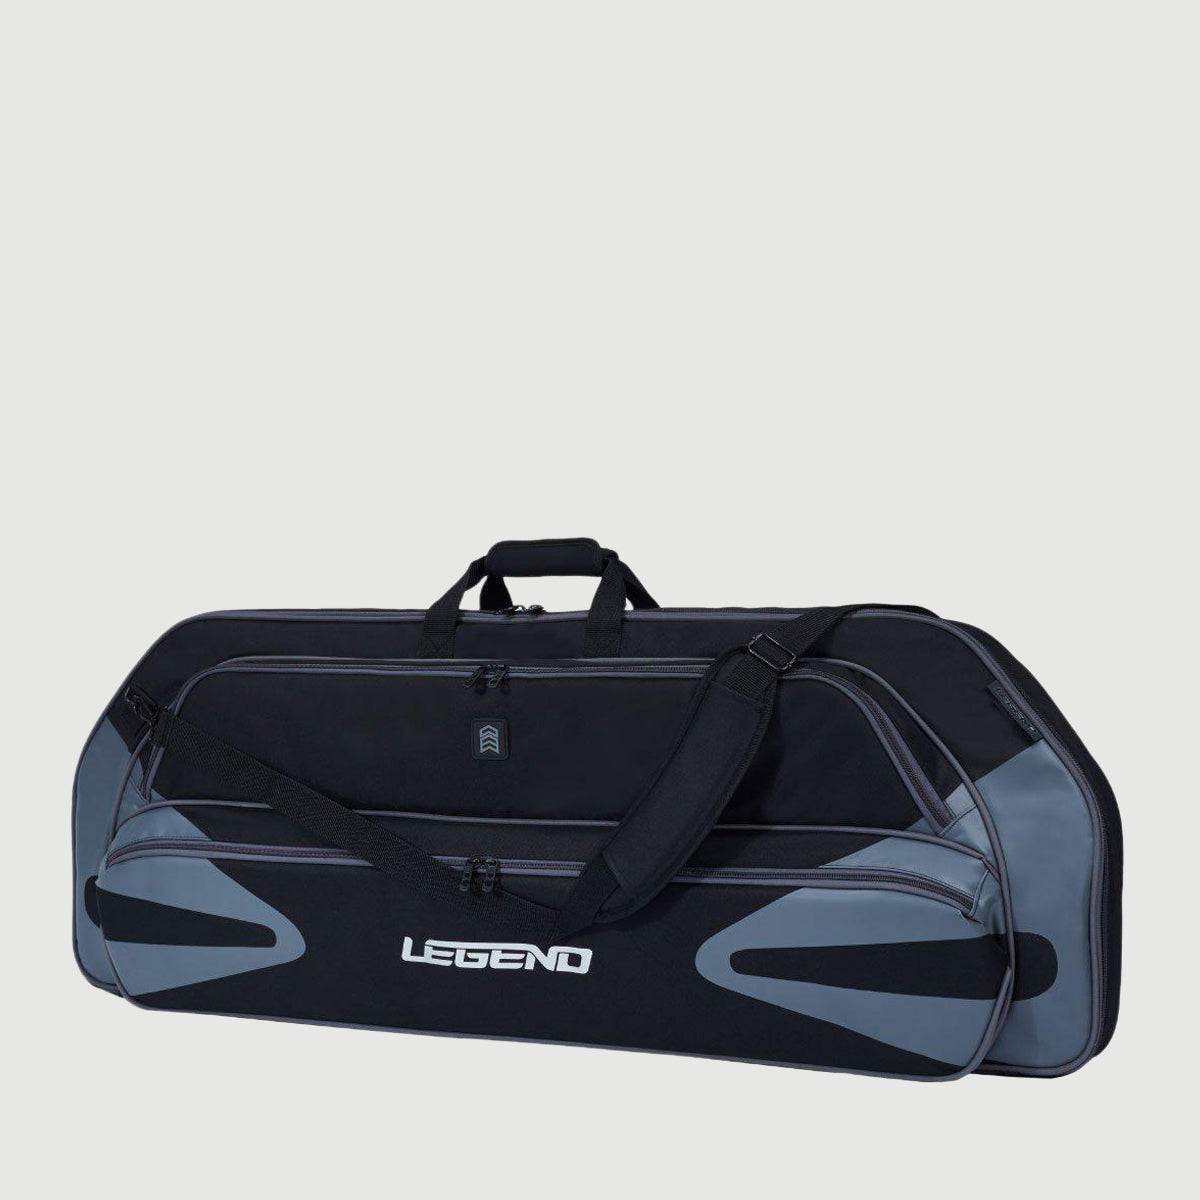 Guard your bow in style with the Monstro Bow Case from Legend Archery